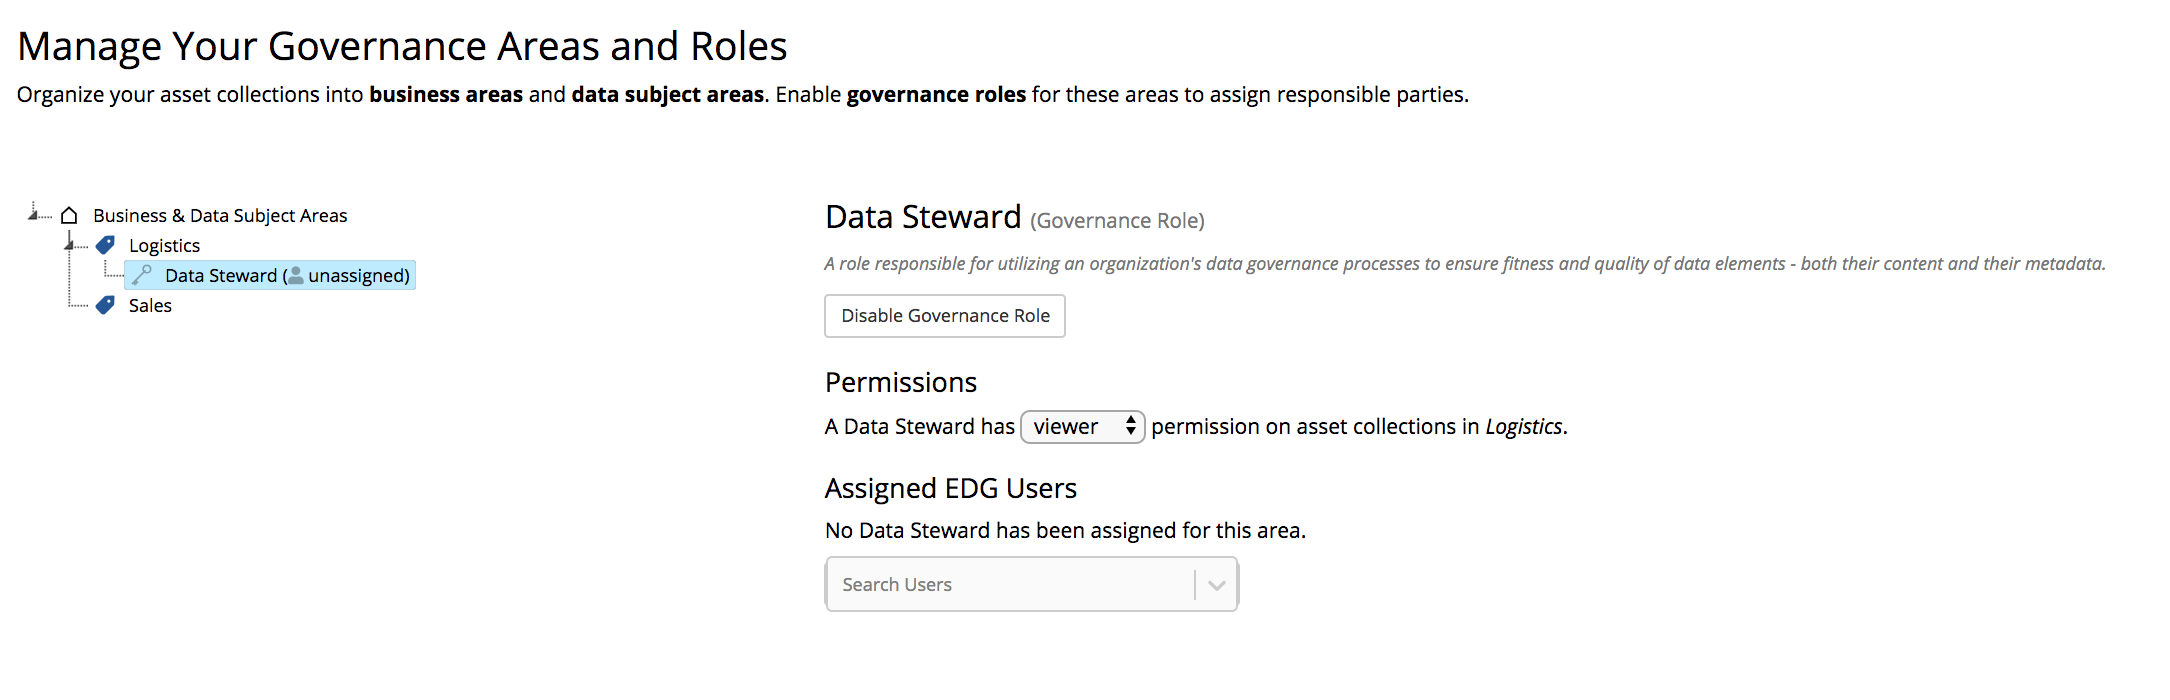 TopBraid EDG Manage Your Governance Areas and Roles Page